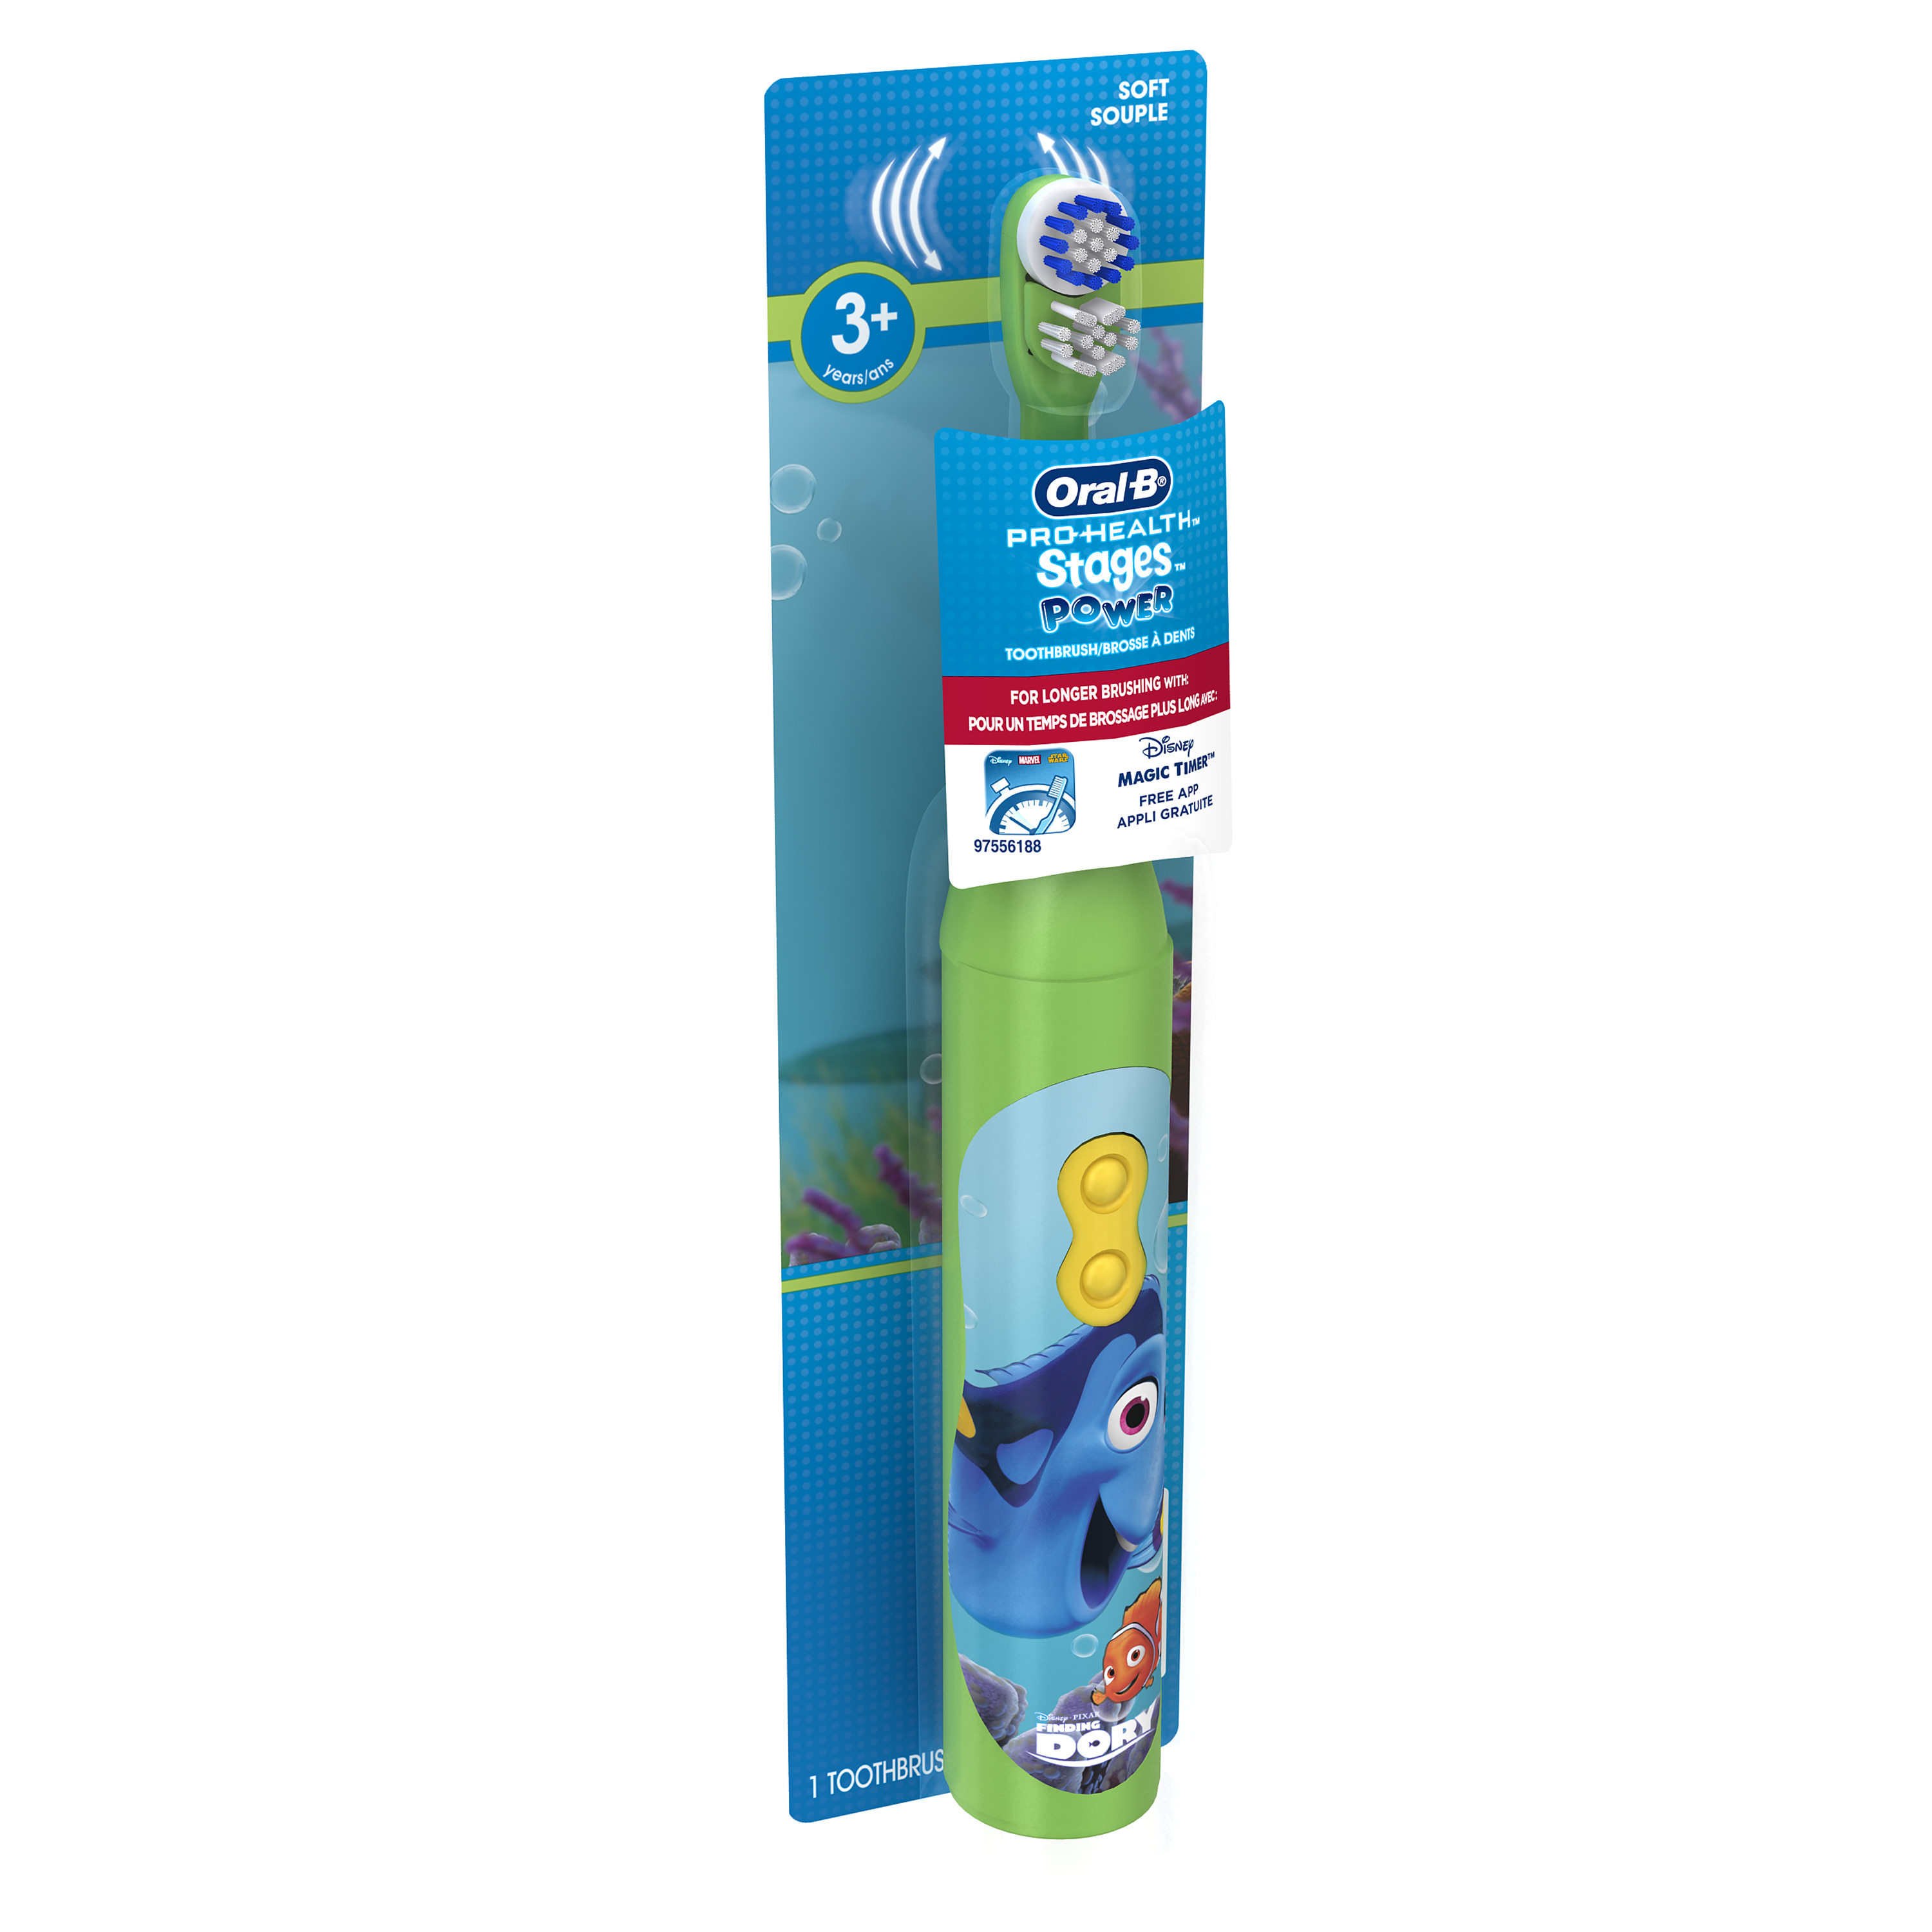 Oral-B Kids Pro-Health Stages Finding Dory Battery Electric Toothbrush - image 2 of 6